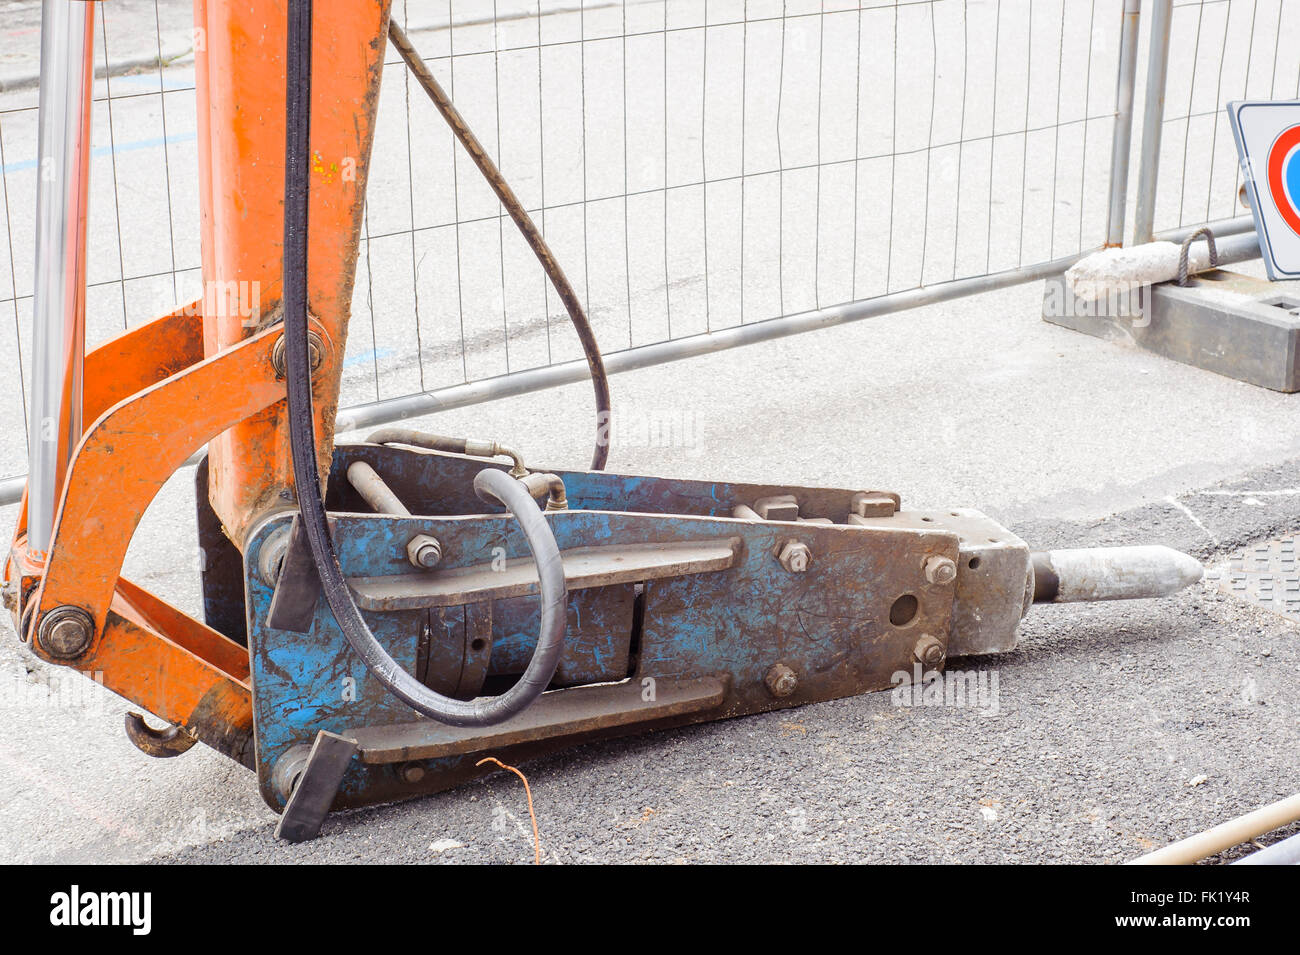 Large pneumatic hammer mounted on the hydraulic arm of a construction equipment Stock Photo